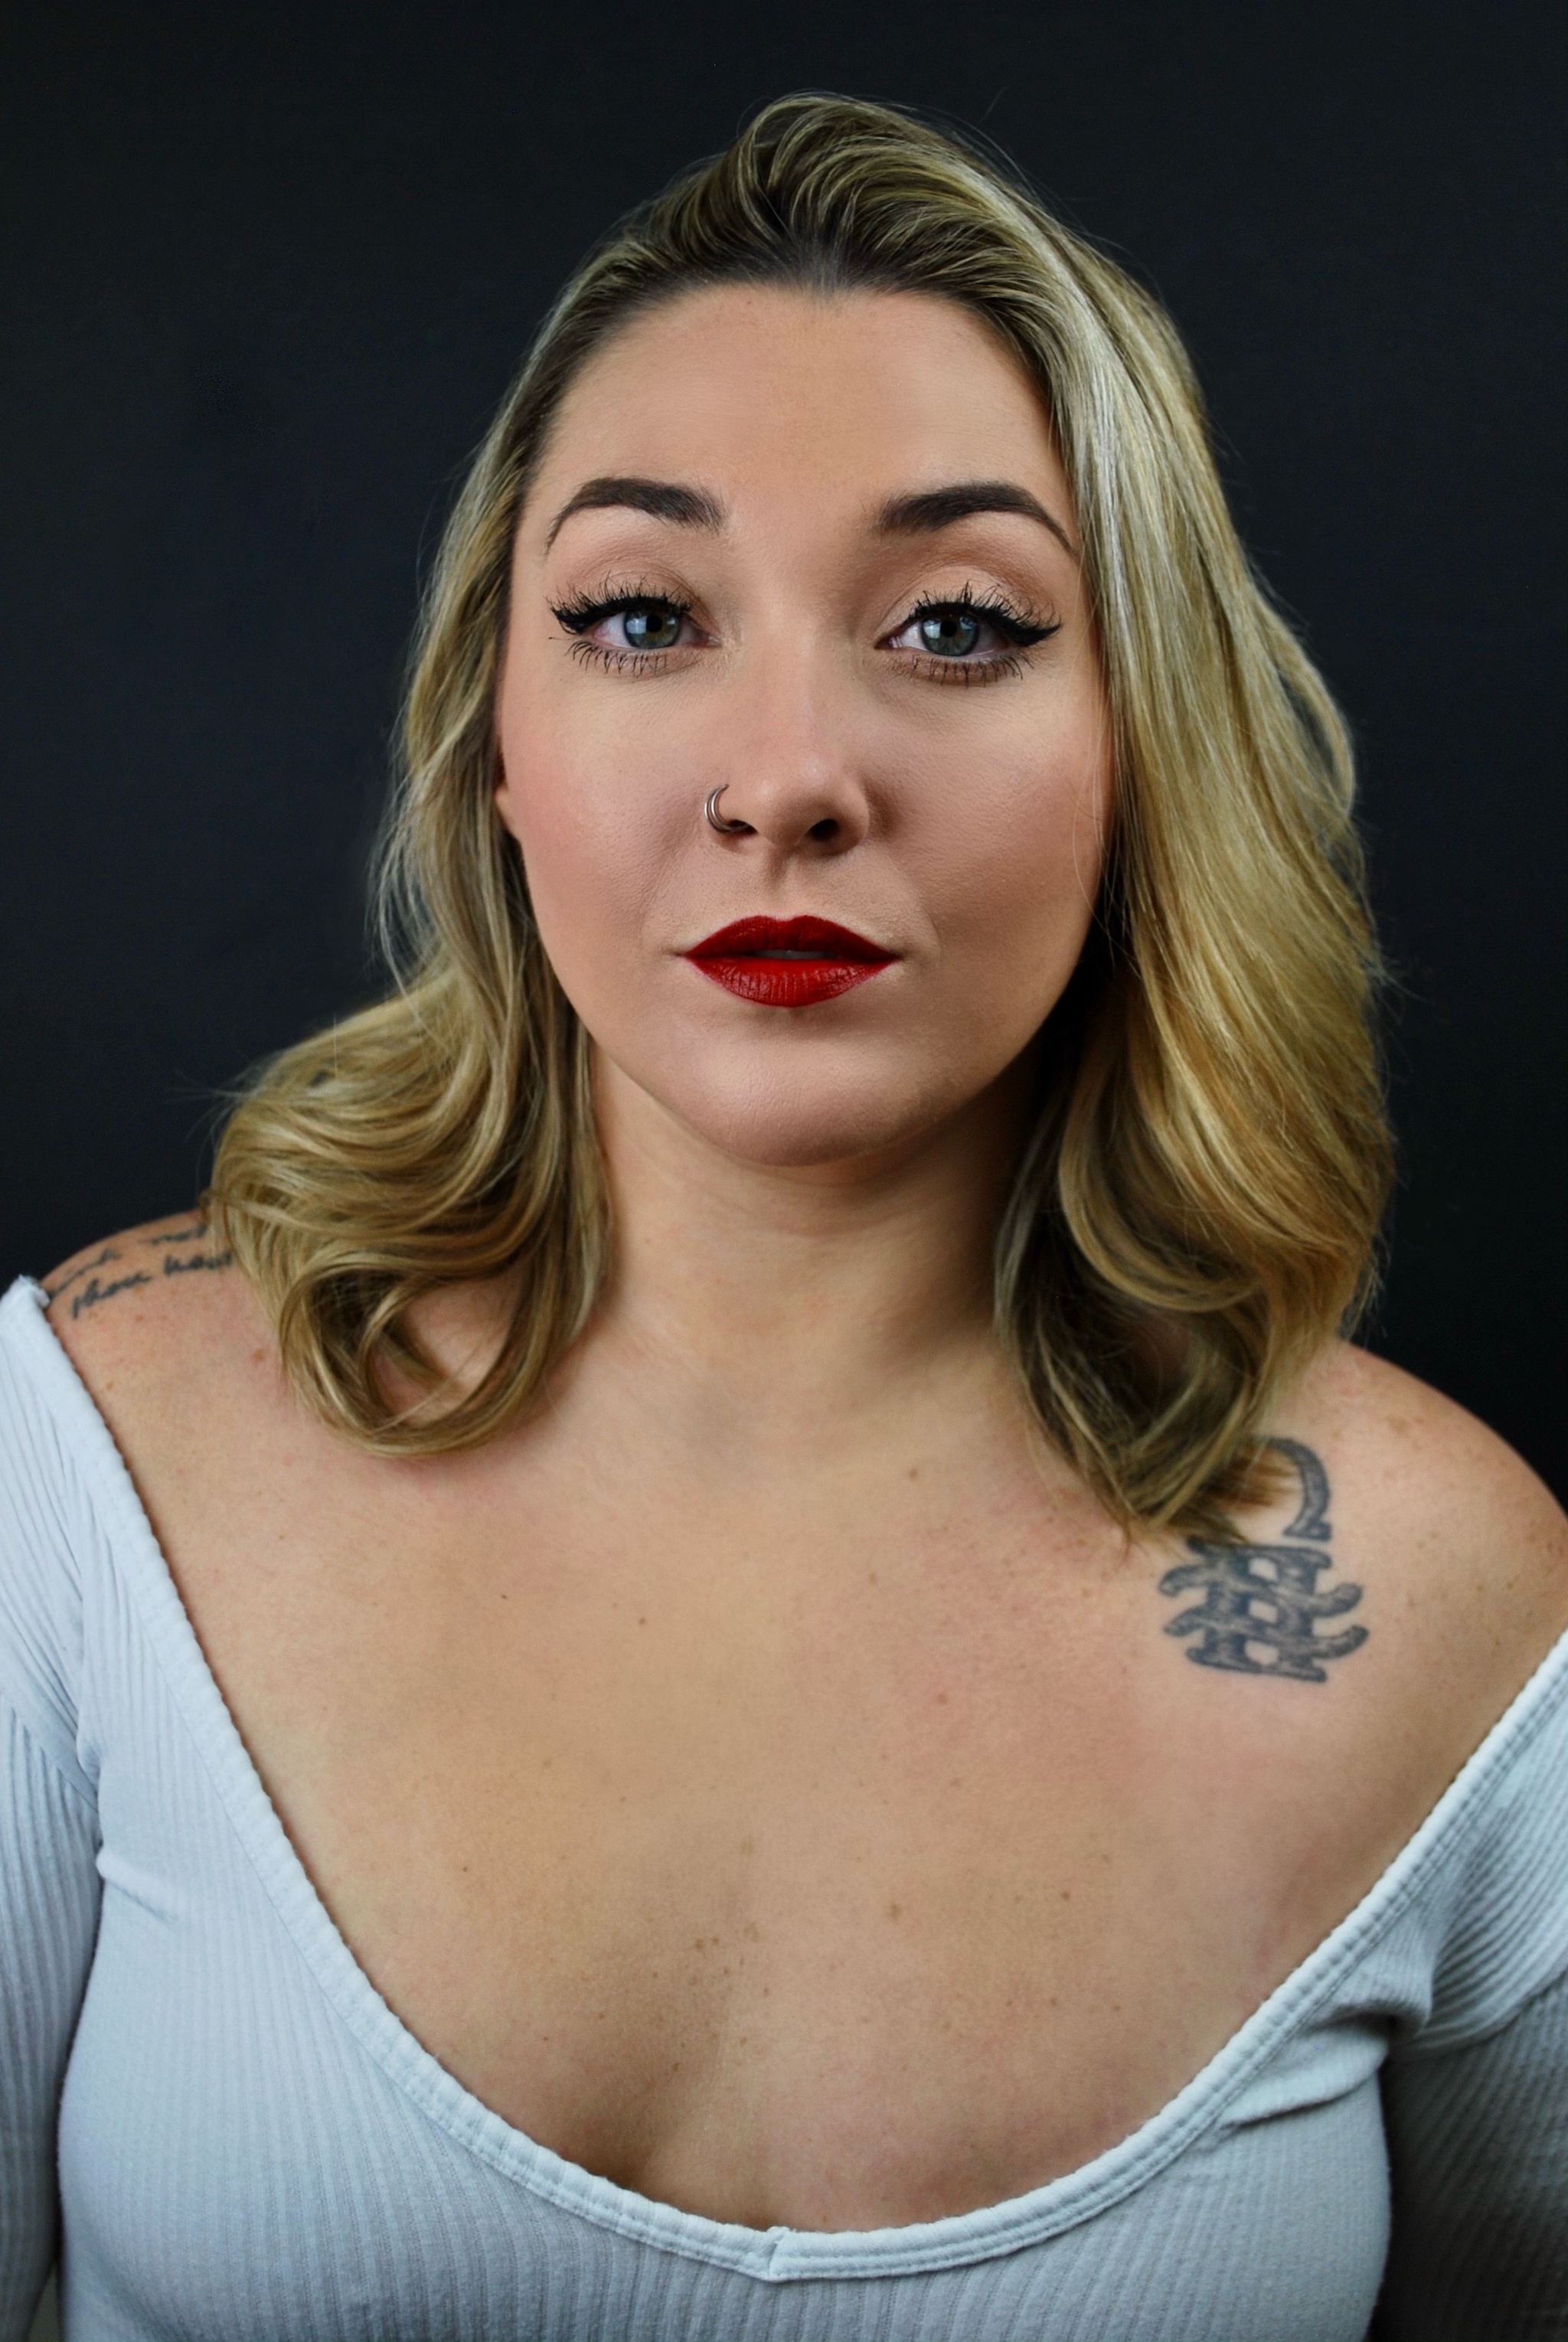 A portrait of the singer STONES, who has wavy blond hair that falls to her shoulder. She raises an eyebrow archly, and wears a low cut blue shirt that shows tattoos on both her shoulders.